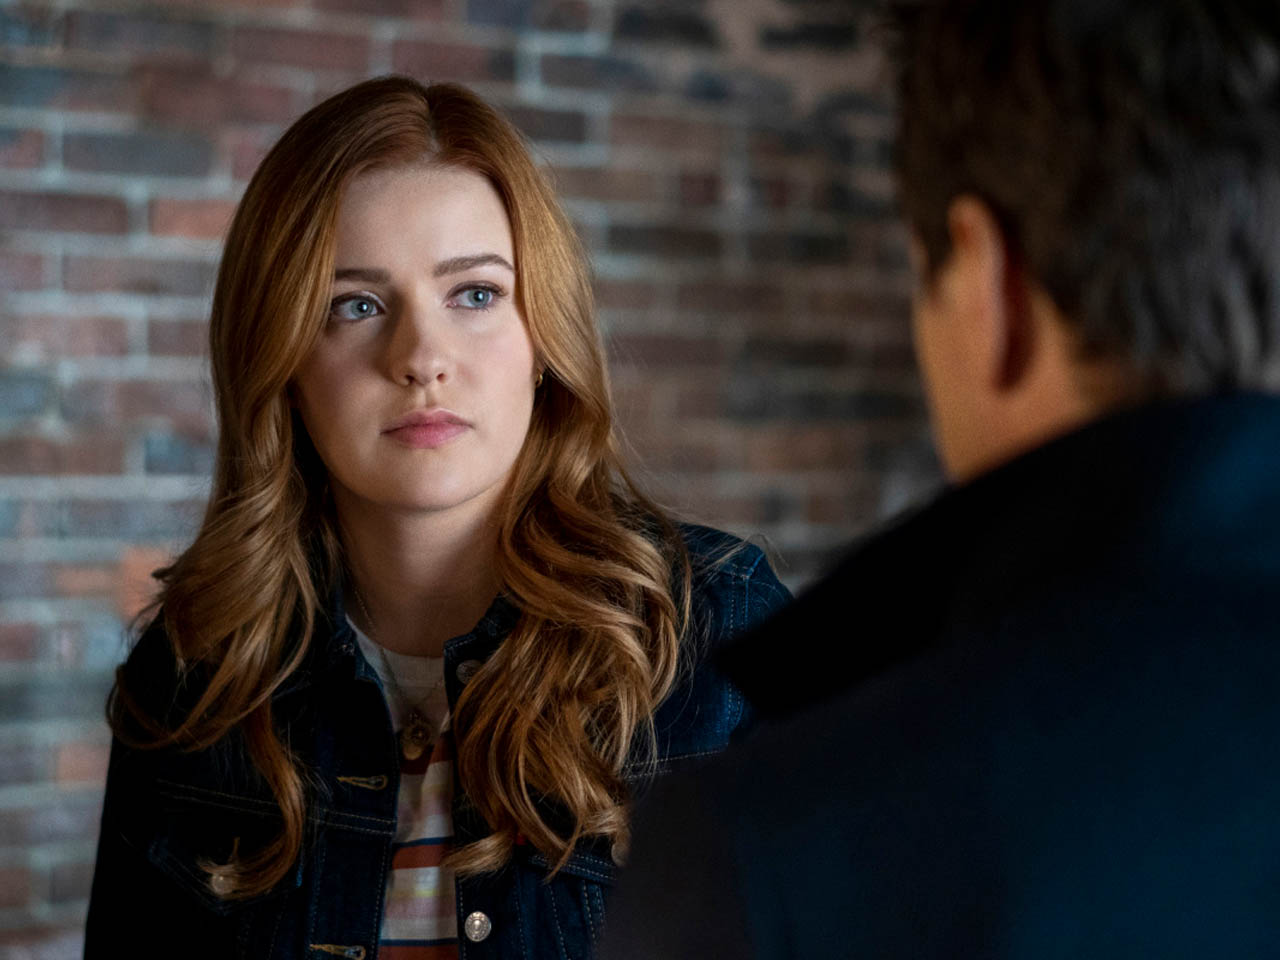 Nancy Drew episode photos show a new mystery has arrived The Nerdy